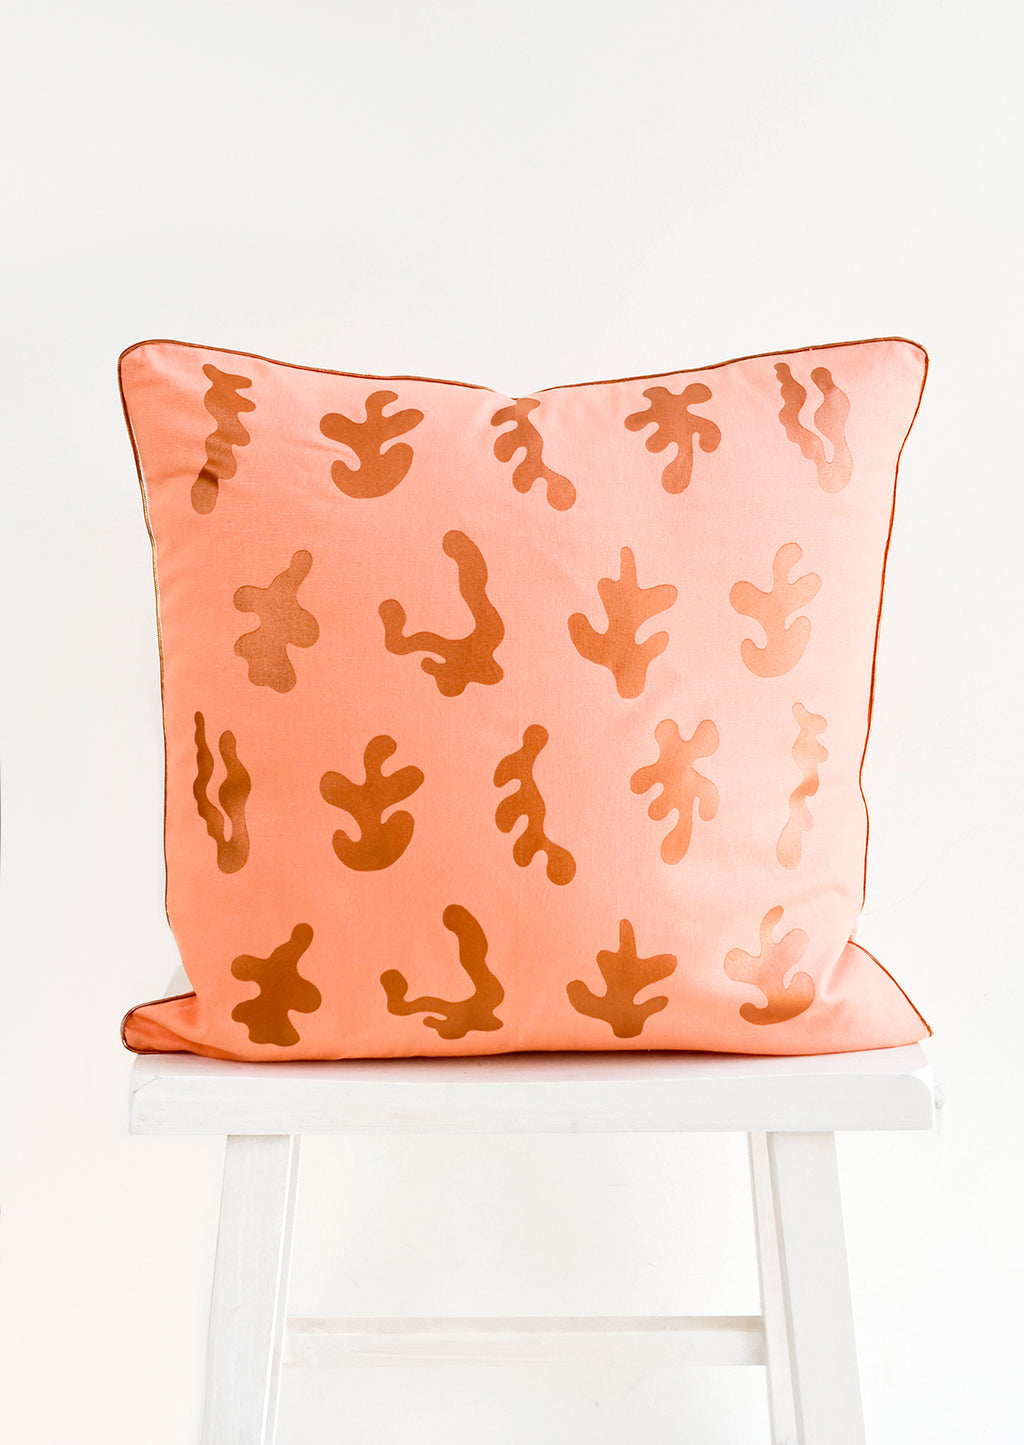 3: Square throw pillow in peach color with copper, screen printed seaweed shapes and copper trim